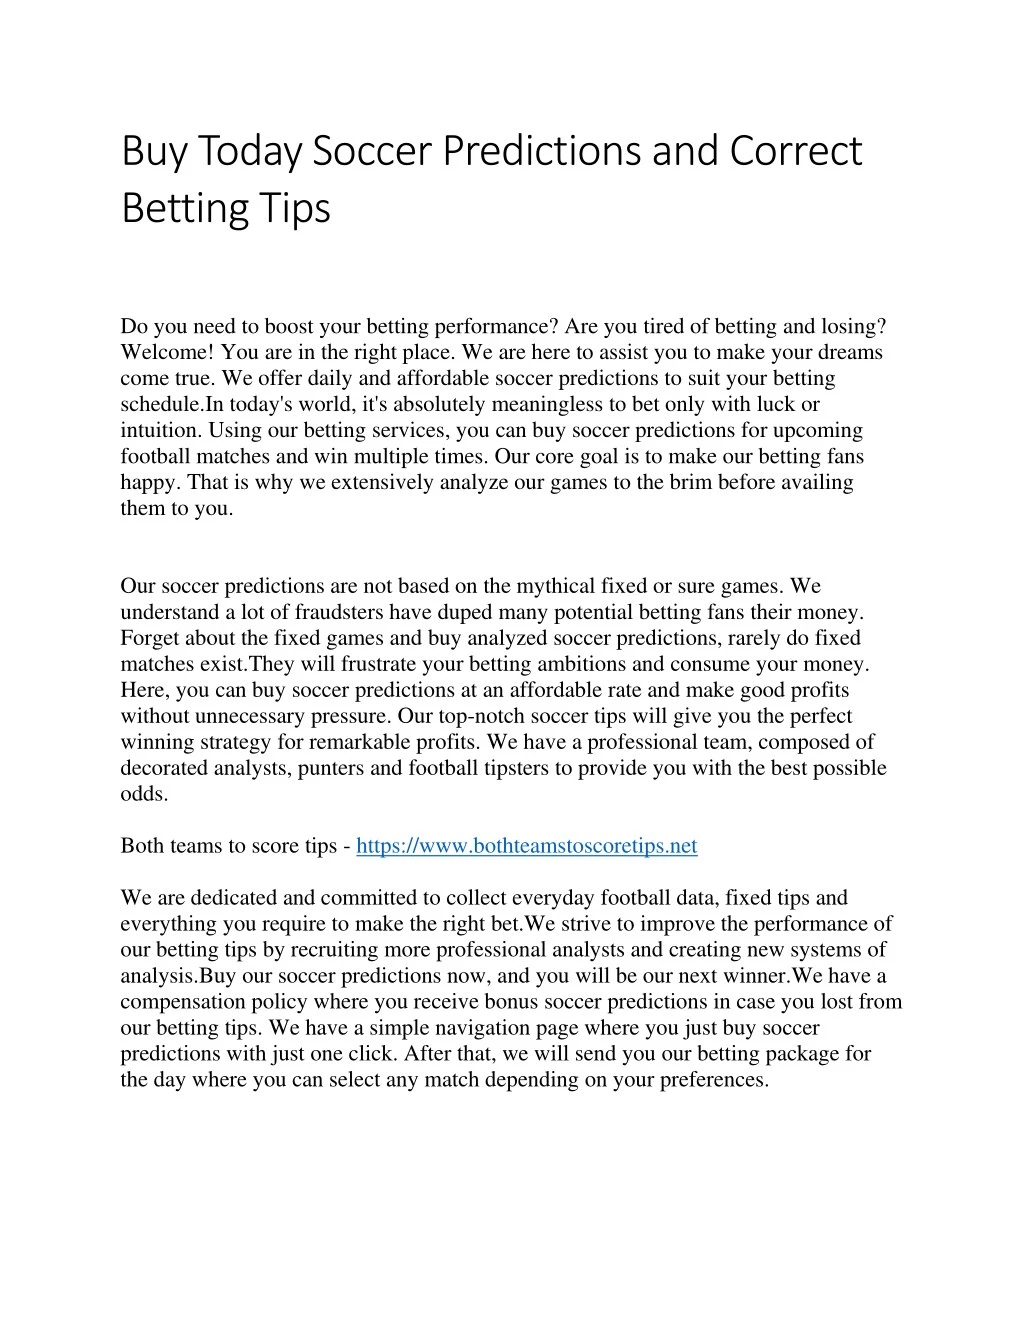 buy today soccer predictions and correct betting